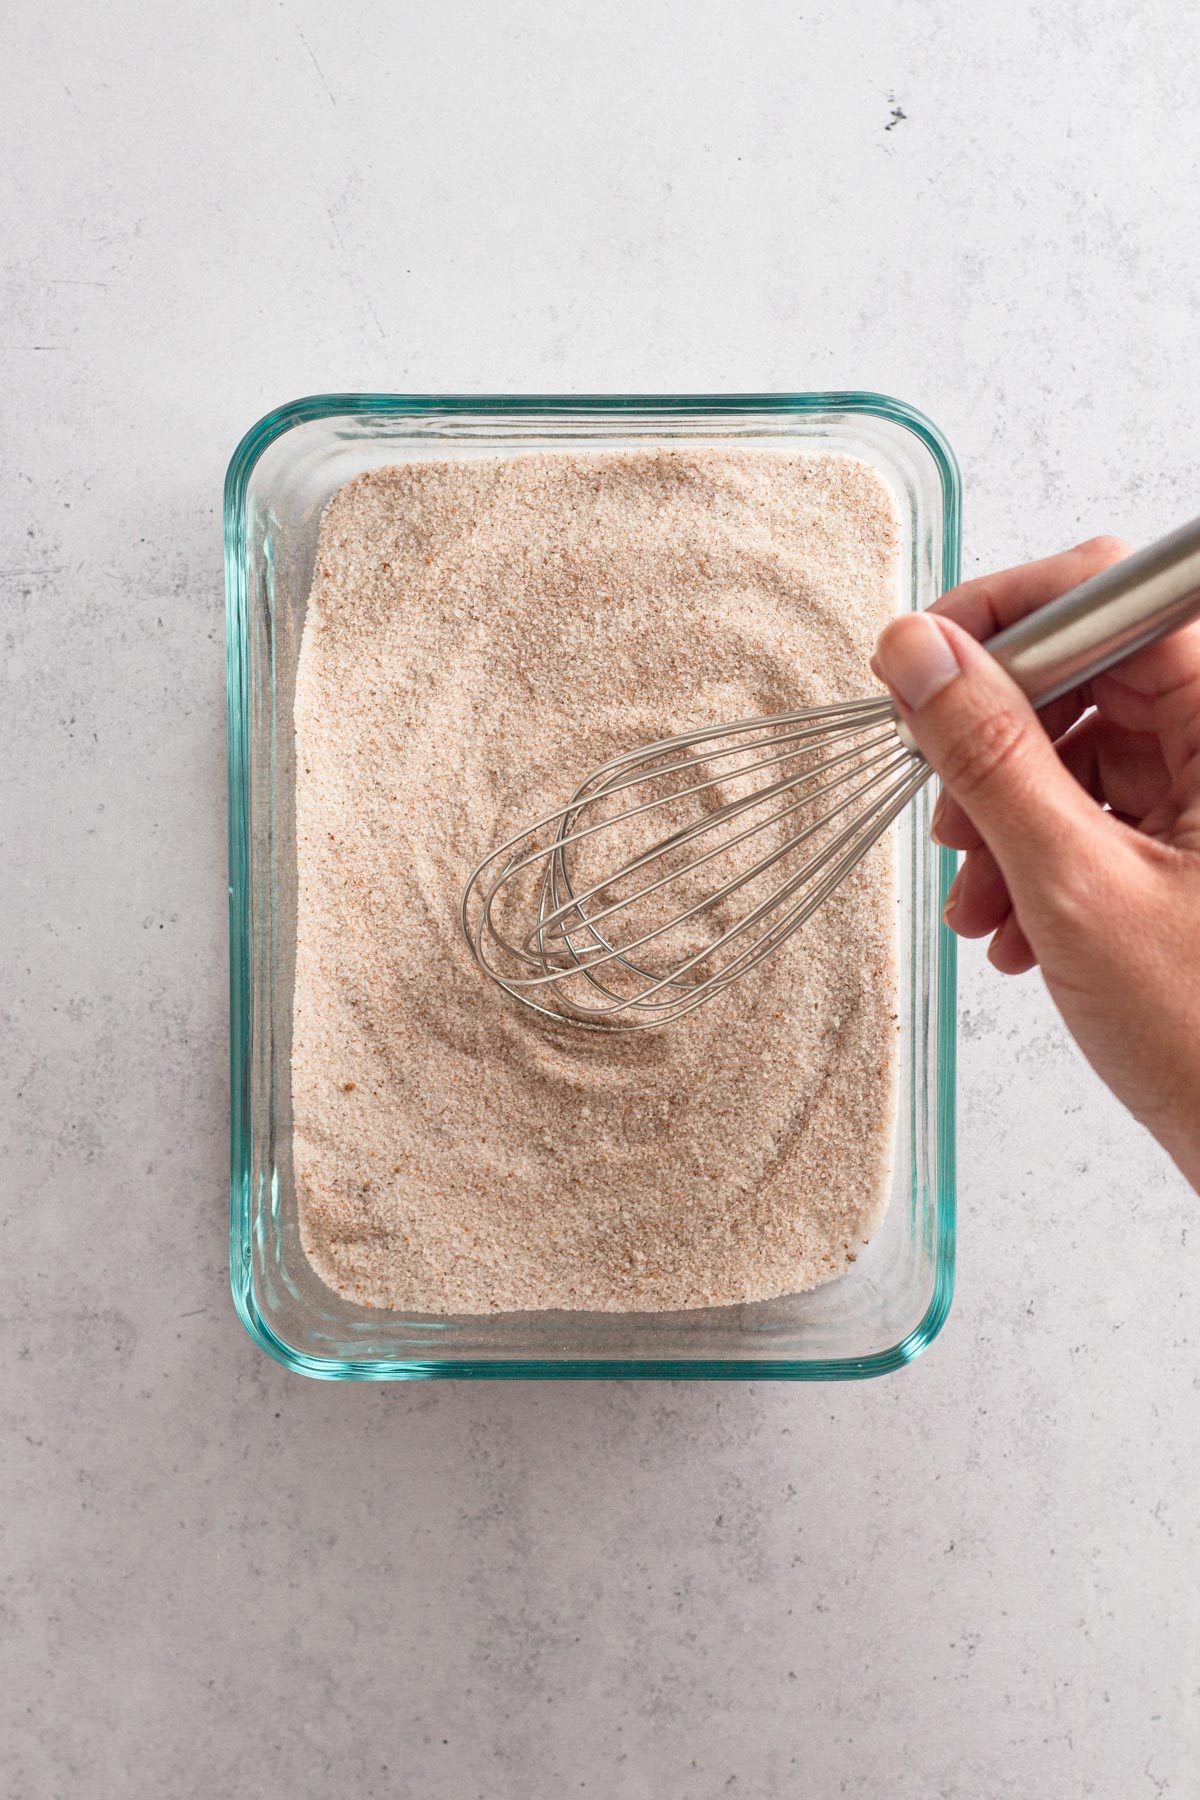 Hand whisking together spiced sugar topping in a glass dish.